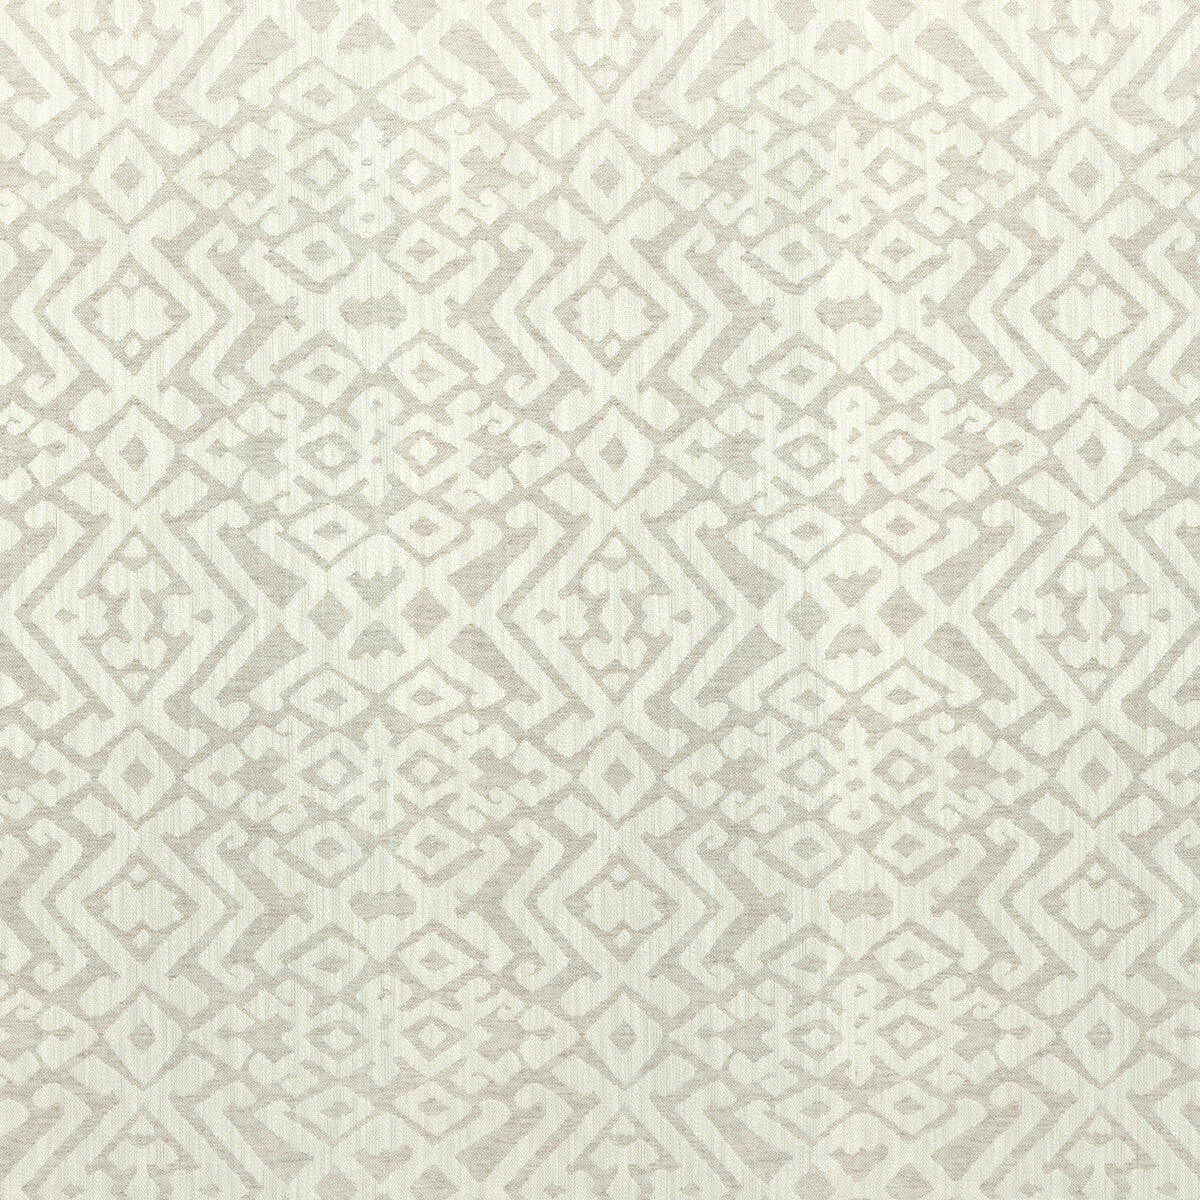 Springbok fabric in flax color - pattern 36874.1116.0 - by Kravet Couture in the Atelier Weaves collection